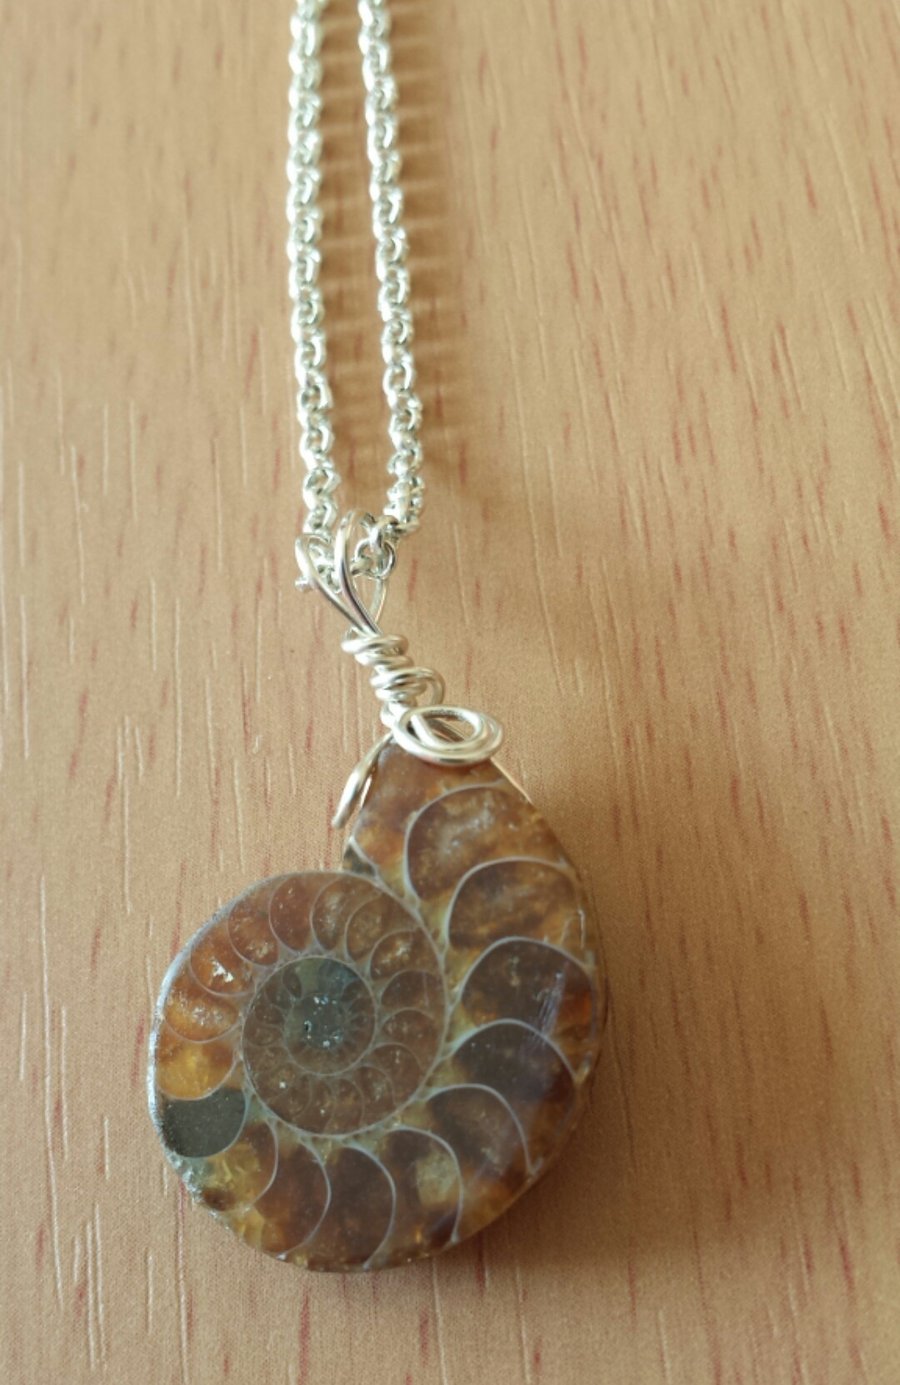 Handcrafted Wire Wrapped Unisex Ammonite Pendant,Fossil, Jurassic Jewellery